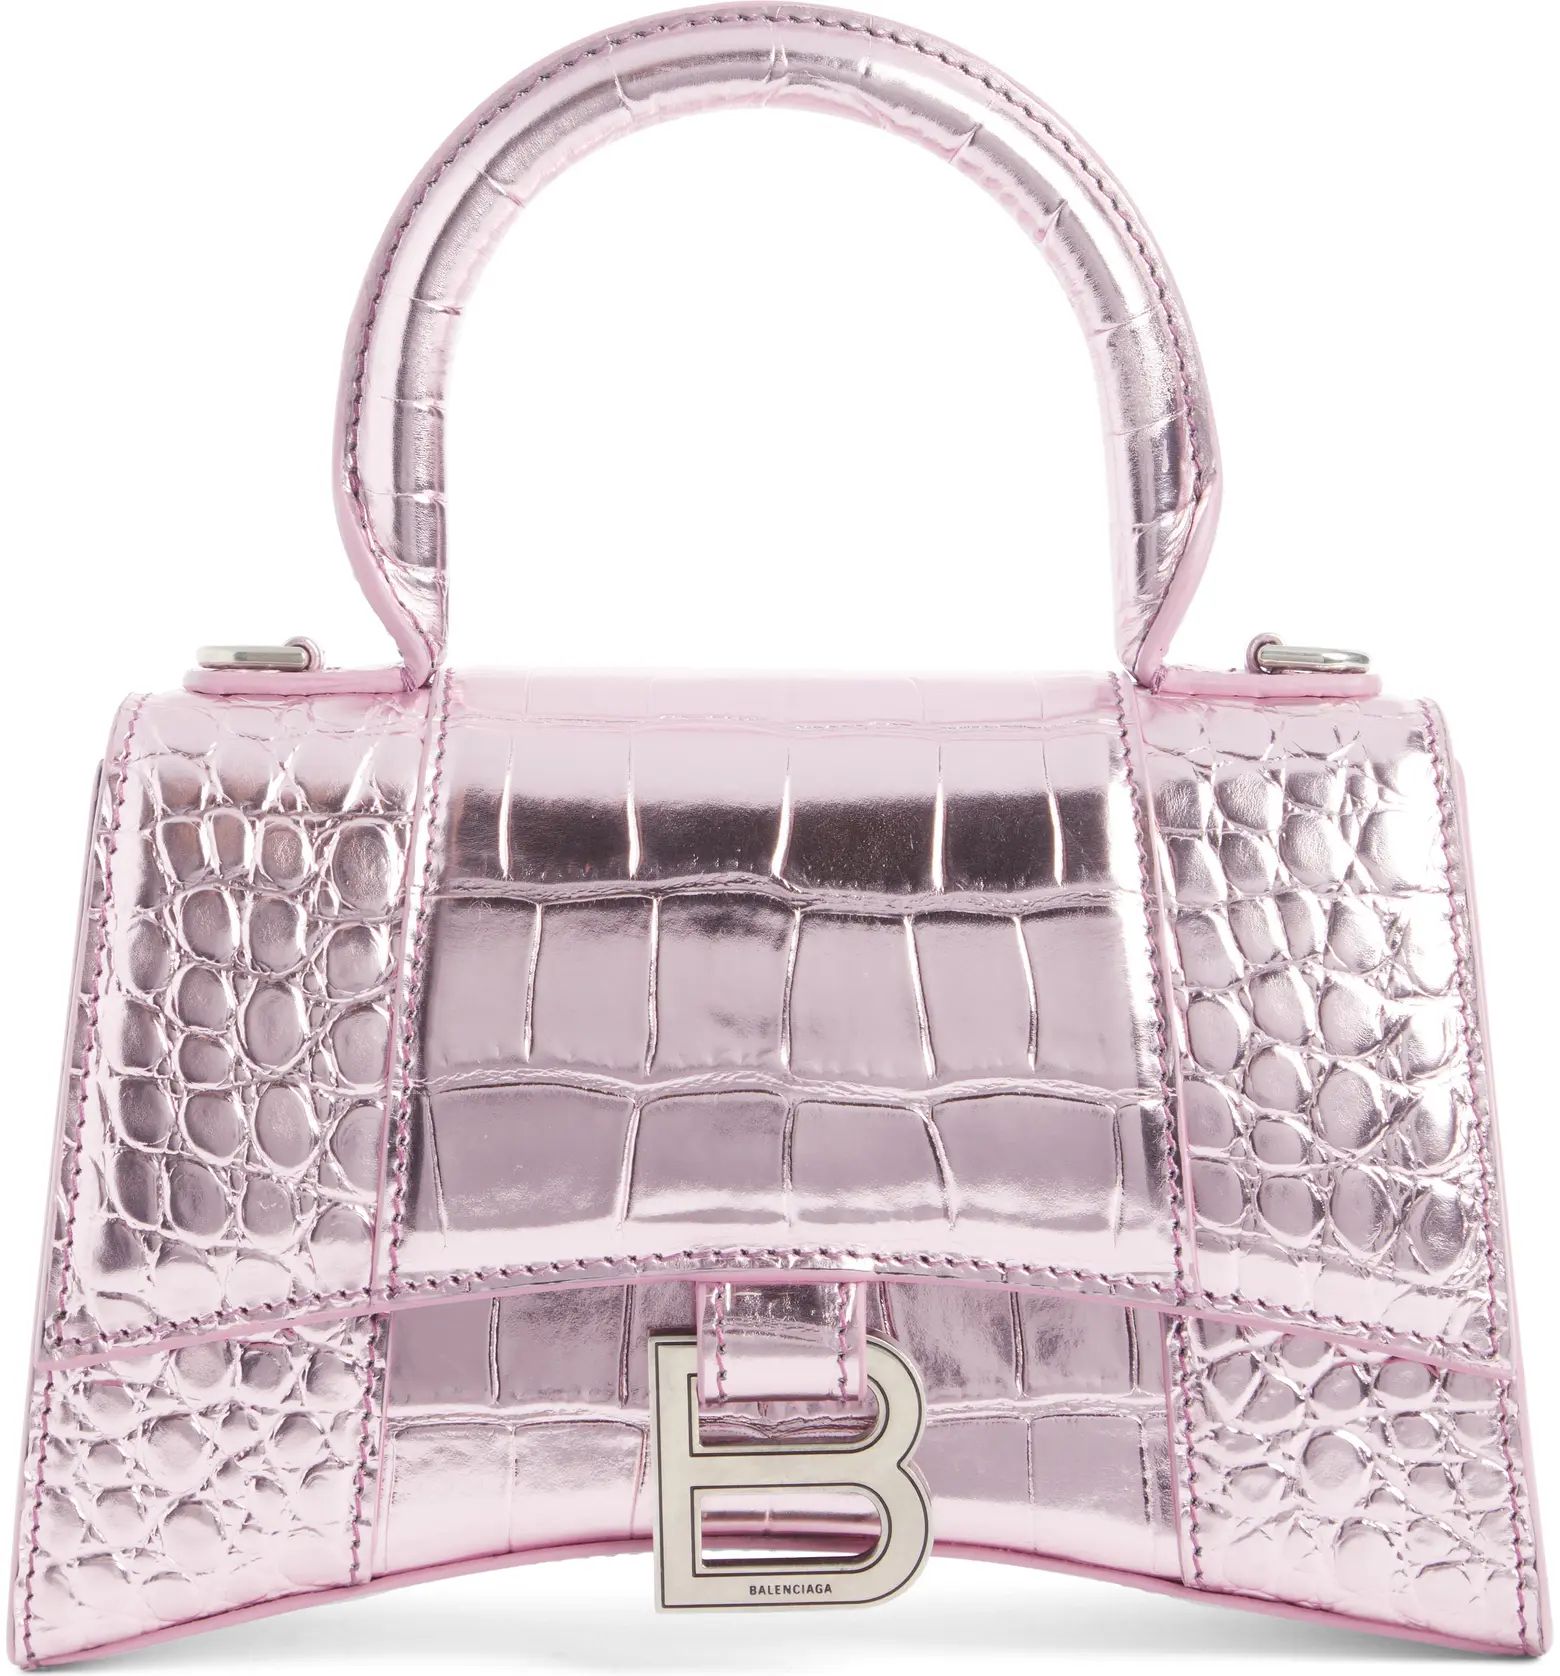 Balenciaga Extra Small Hourglass Metallic Leather Top Handle Bag | Nordstrom | Nordstrom